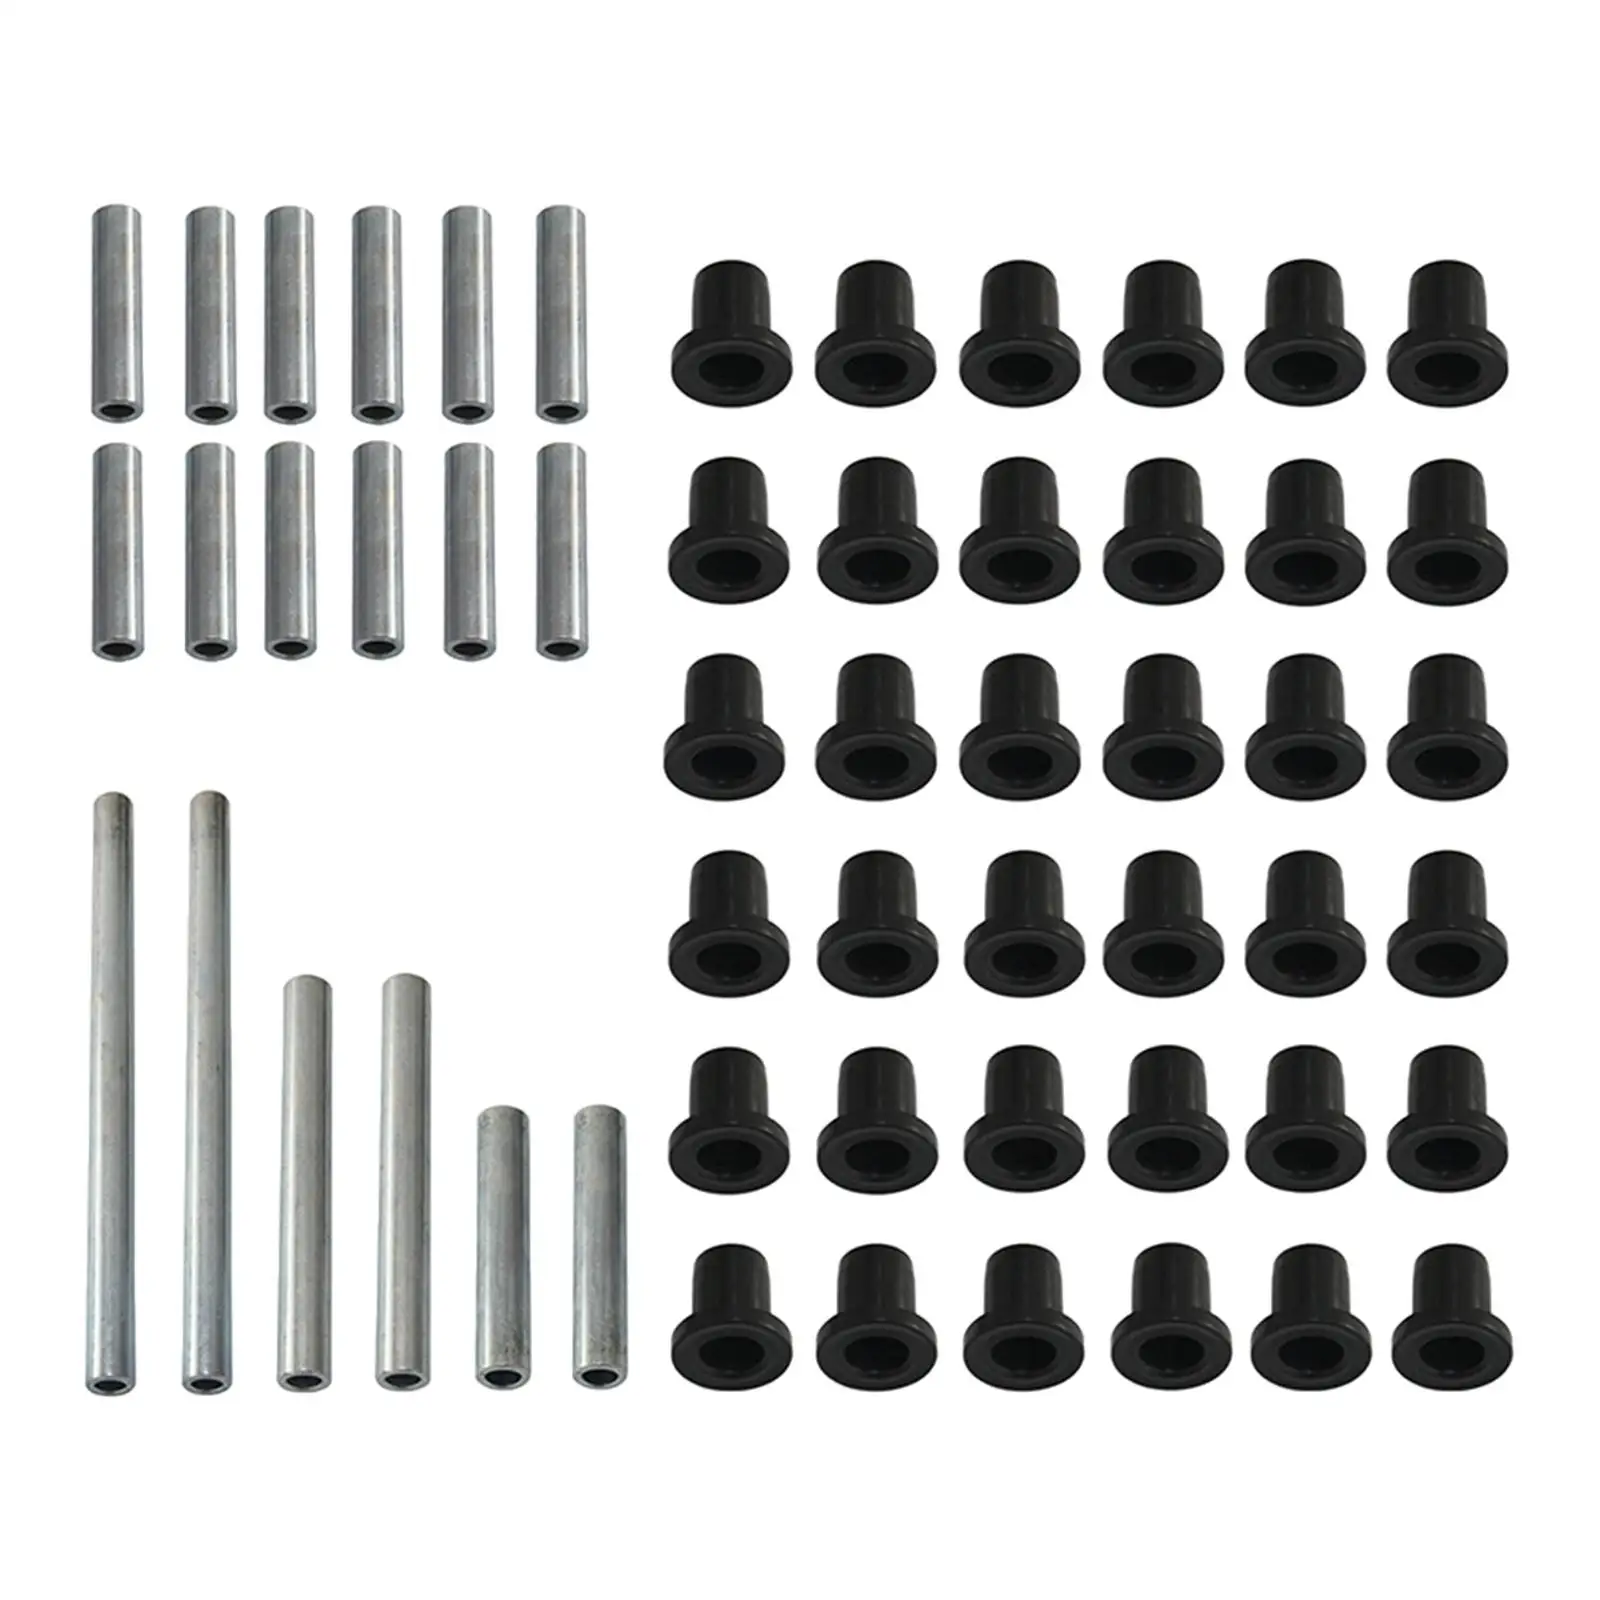 A Arm Bushing Kit Sleeves and Hardware Complete Kit Accessories Control Arm Bushing Kit Replace for Polaris Ranger XP 900